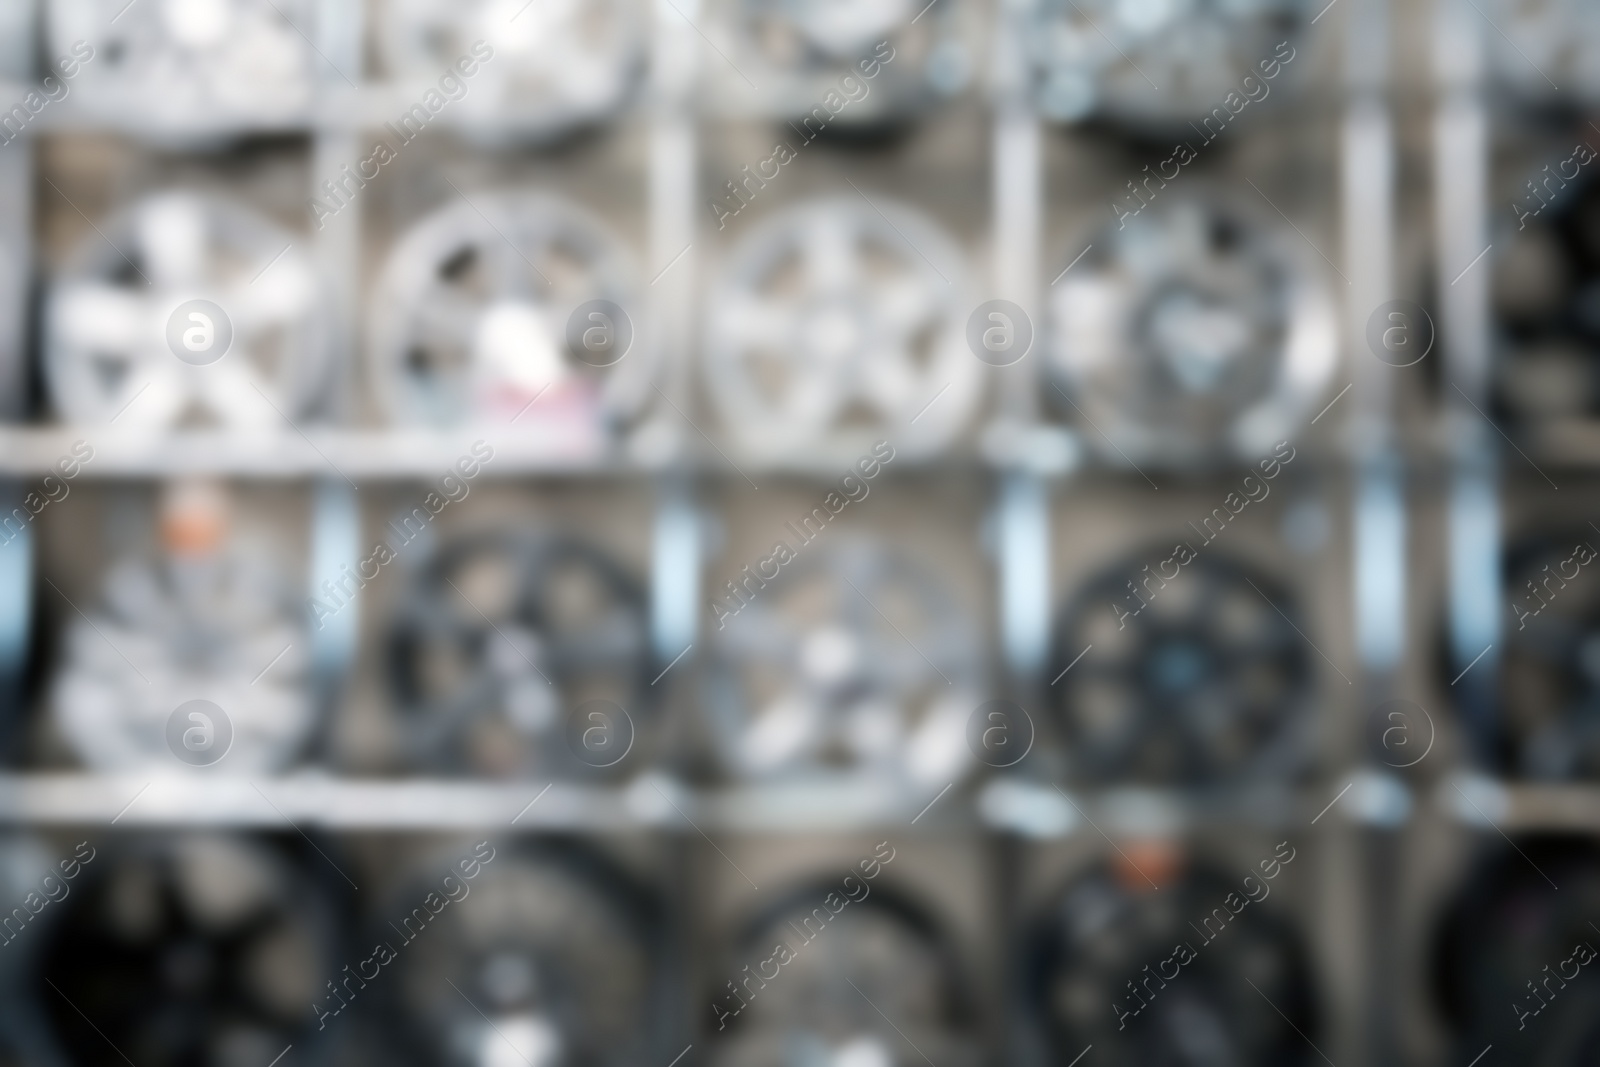 Photo of Blurred view of alloy wheels on racks in automobile service center